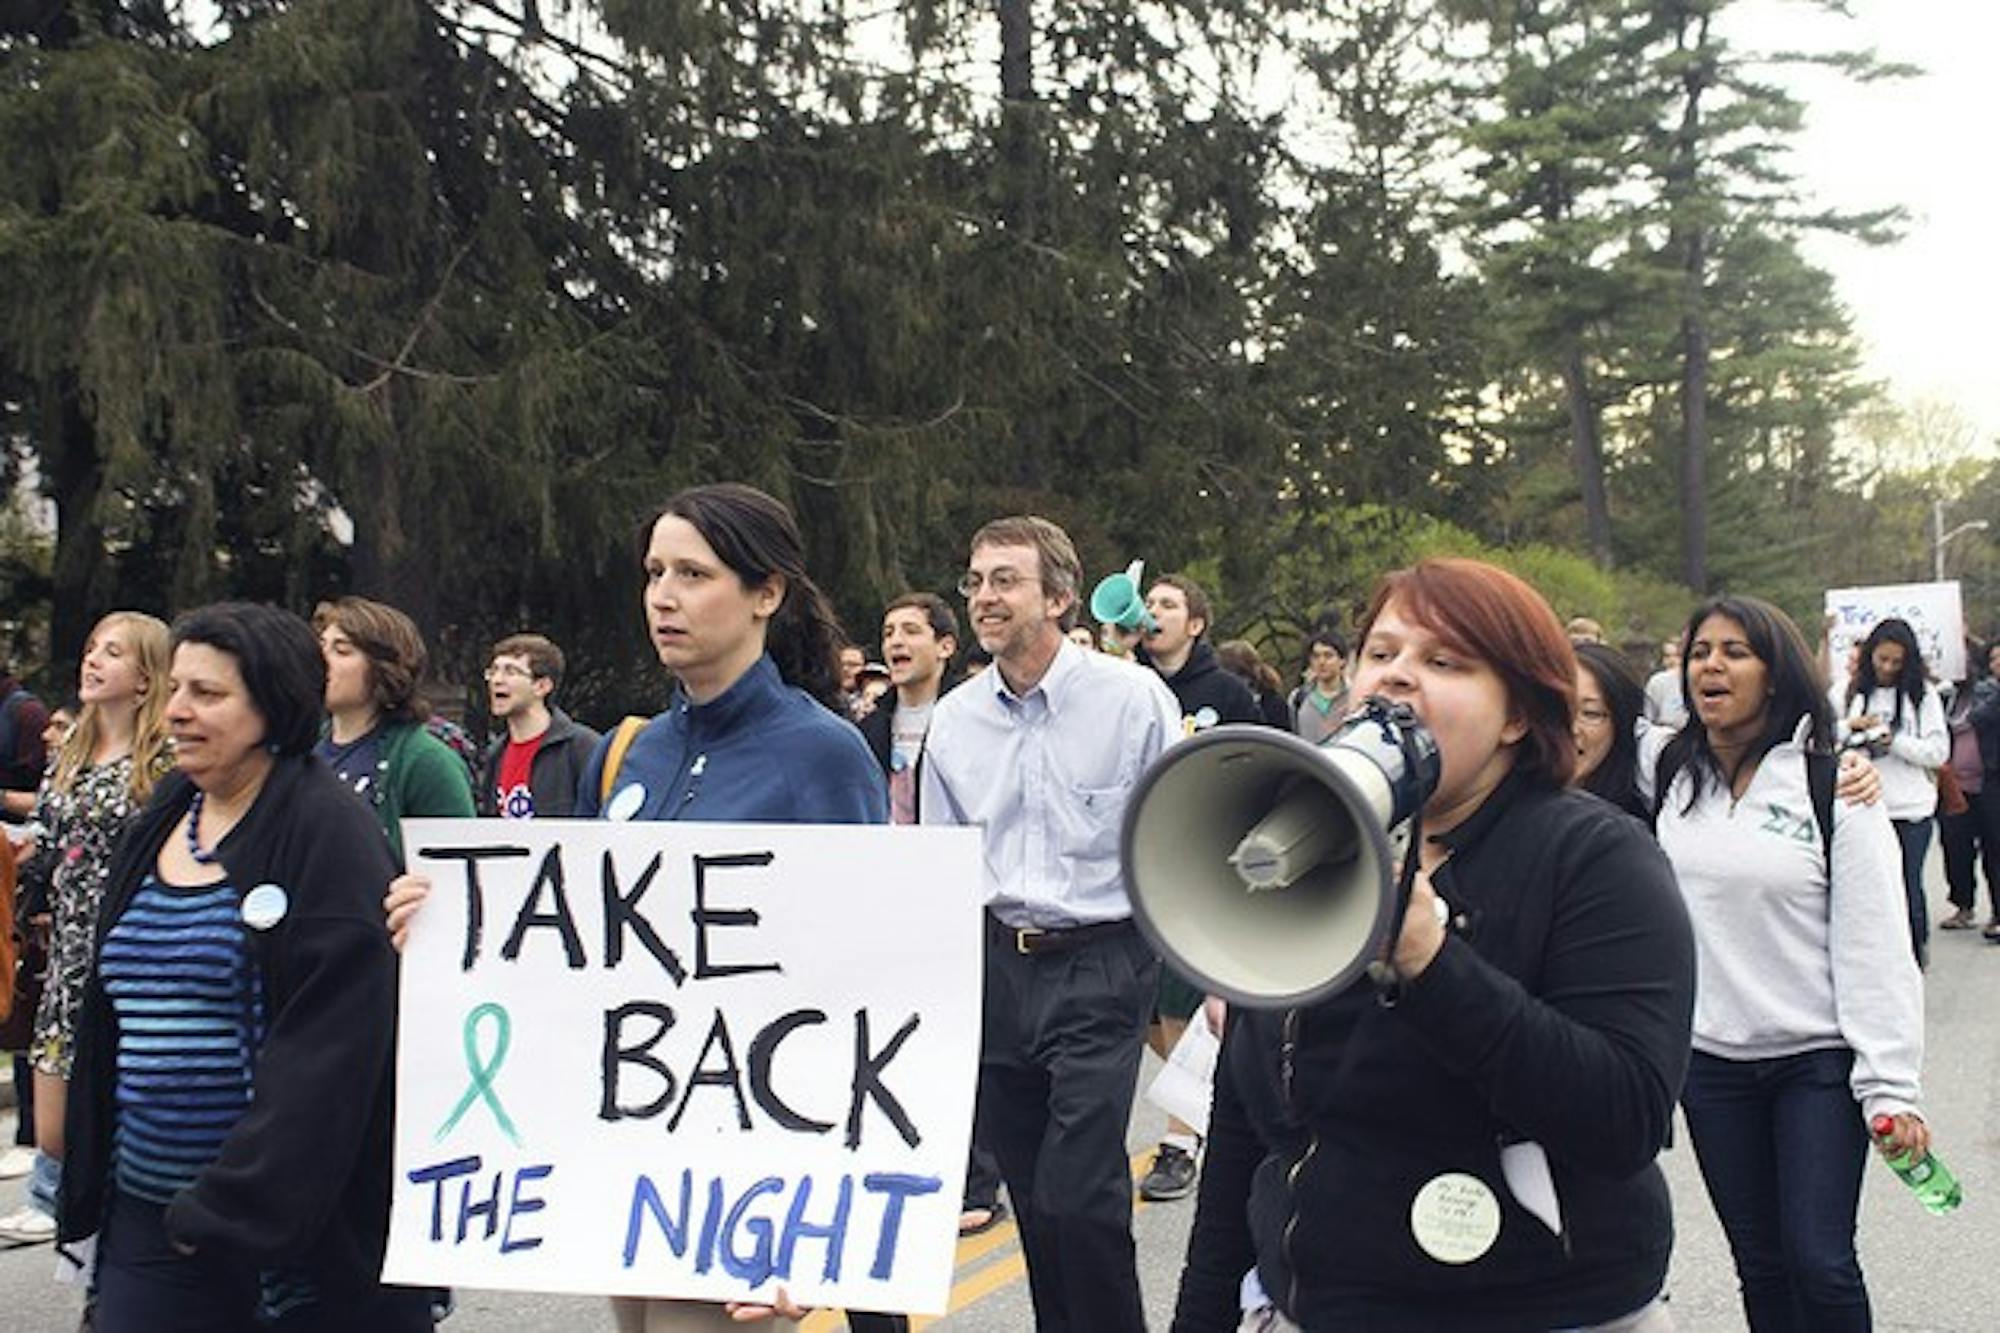 A group of students and other Dartmouth community members gathered Wednesday to raise sexual assault awareness during the Take Back the Night march.